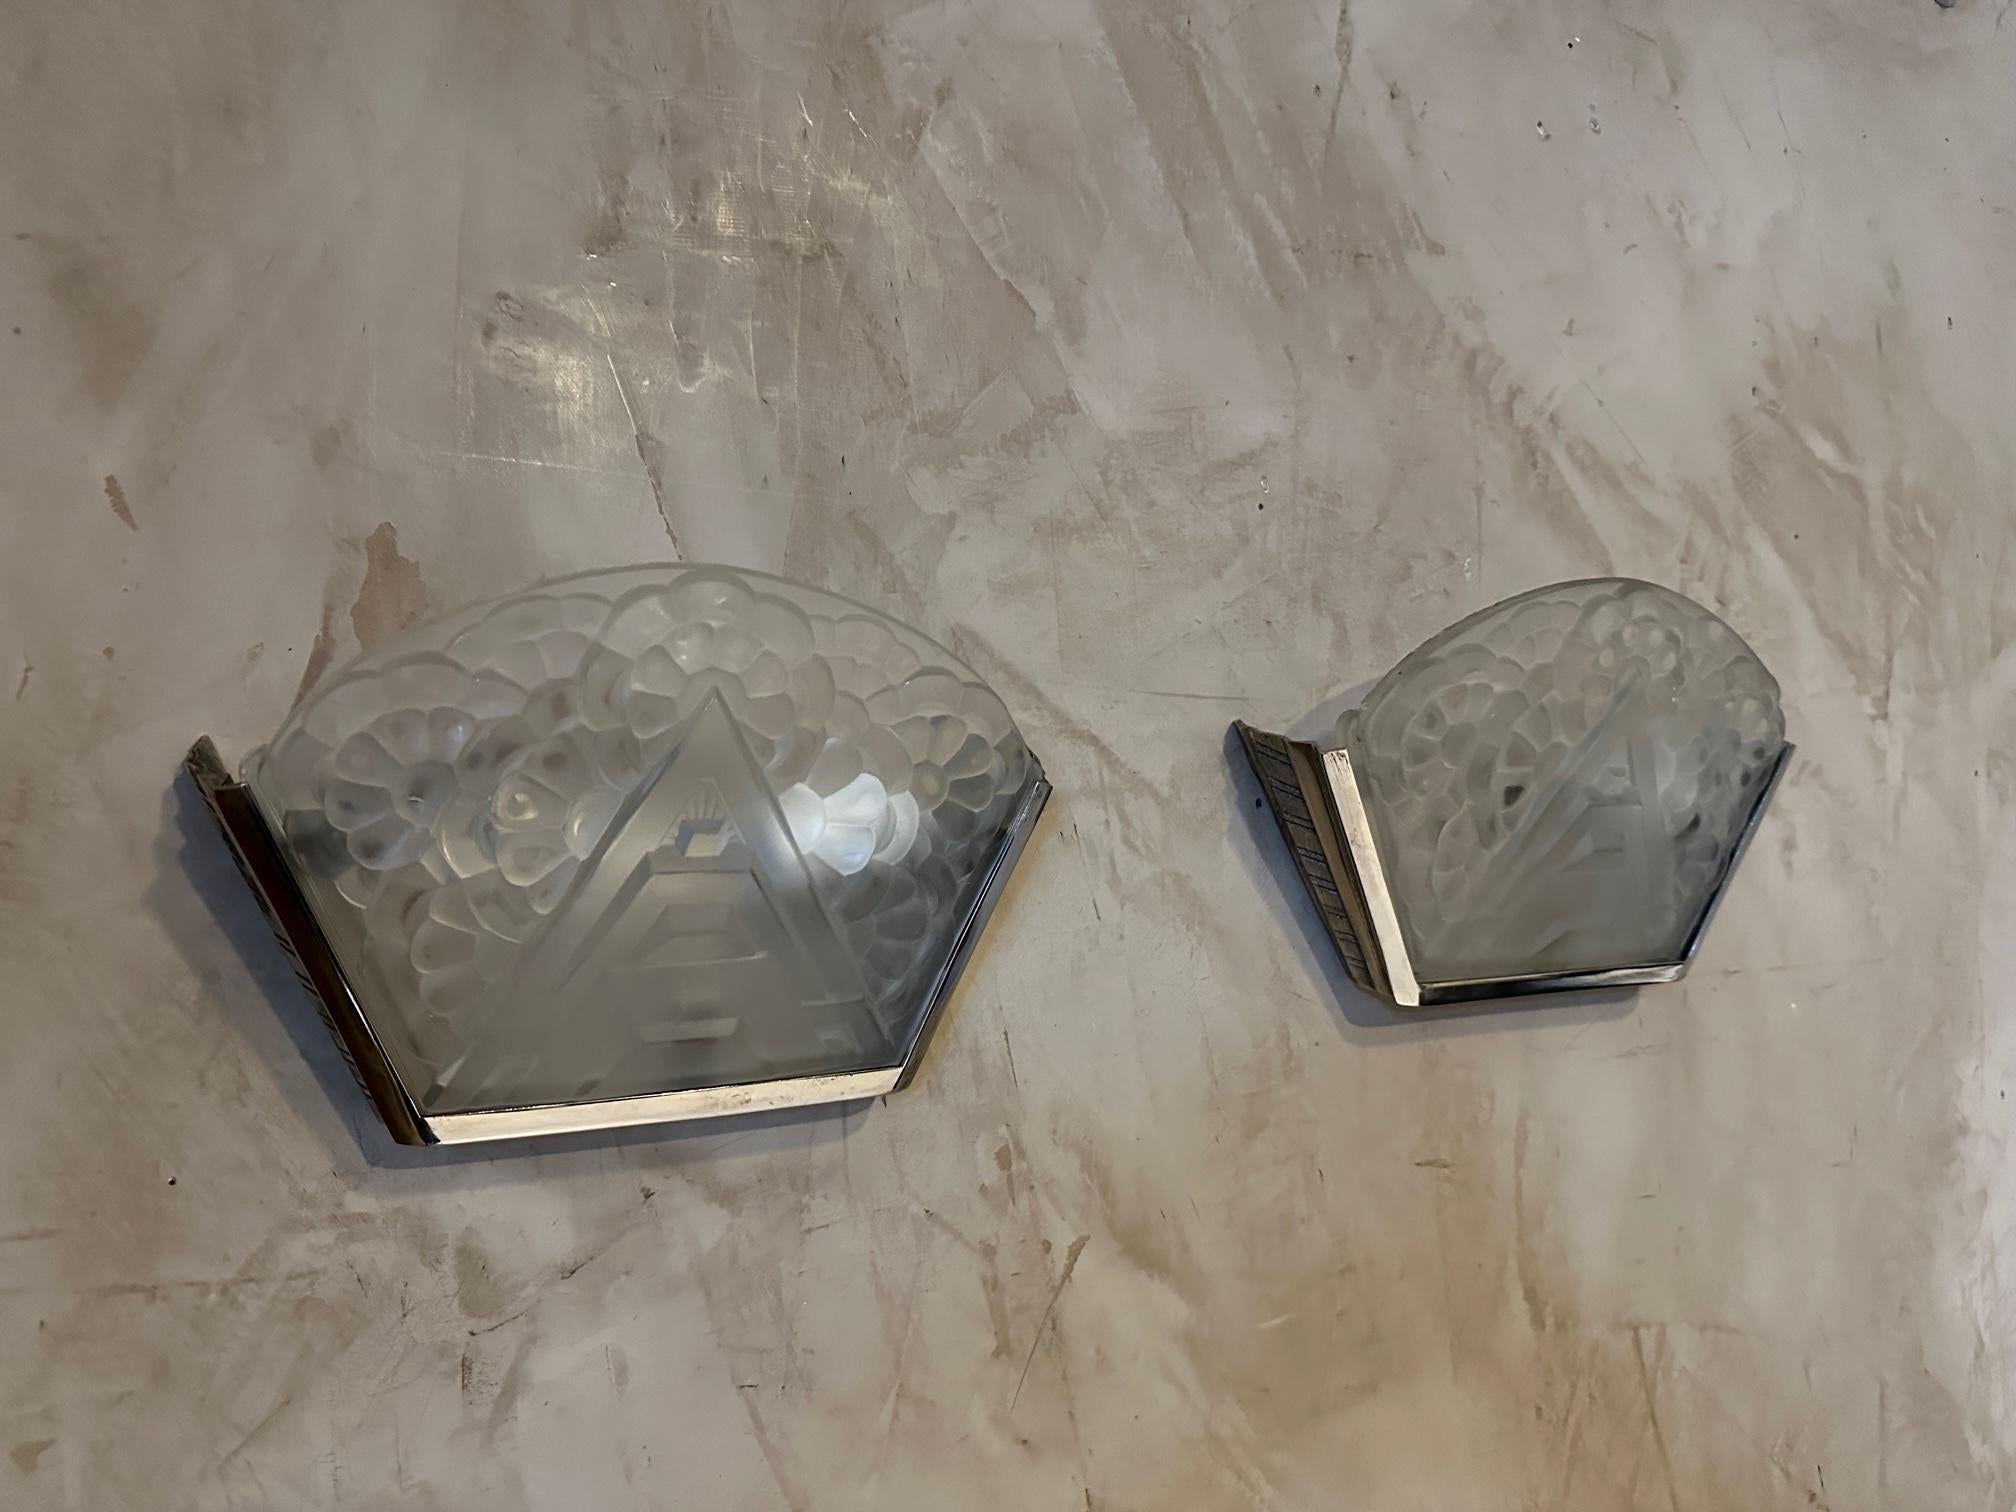 Very beautiful pair of art deco wall lights in tempered glass engraved with flowers and graphic lines typical of the Art Deco years.
Chromed metal frame also with beautiful graphics.
Signature on the glass. Good quality and good condition.
For art